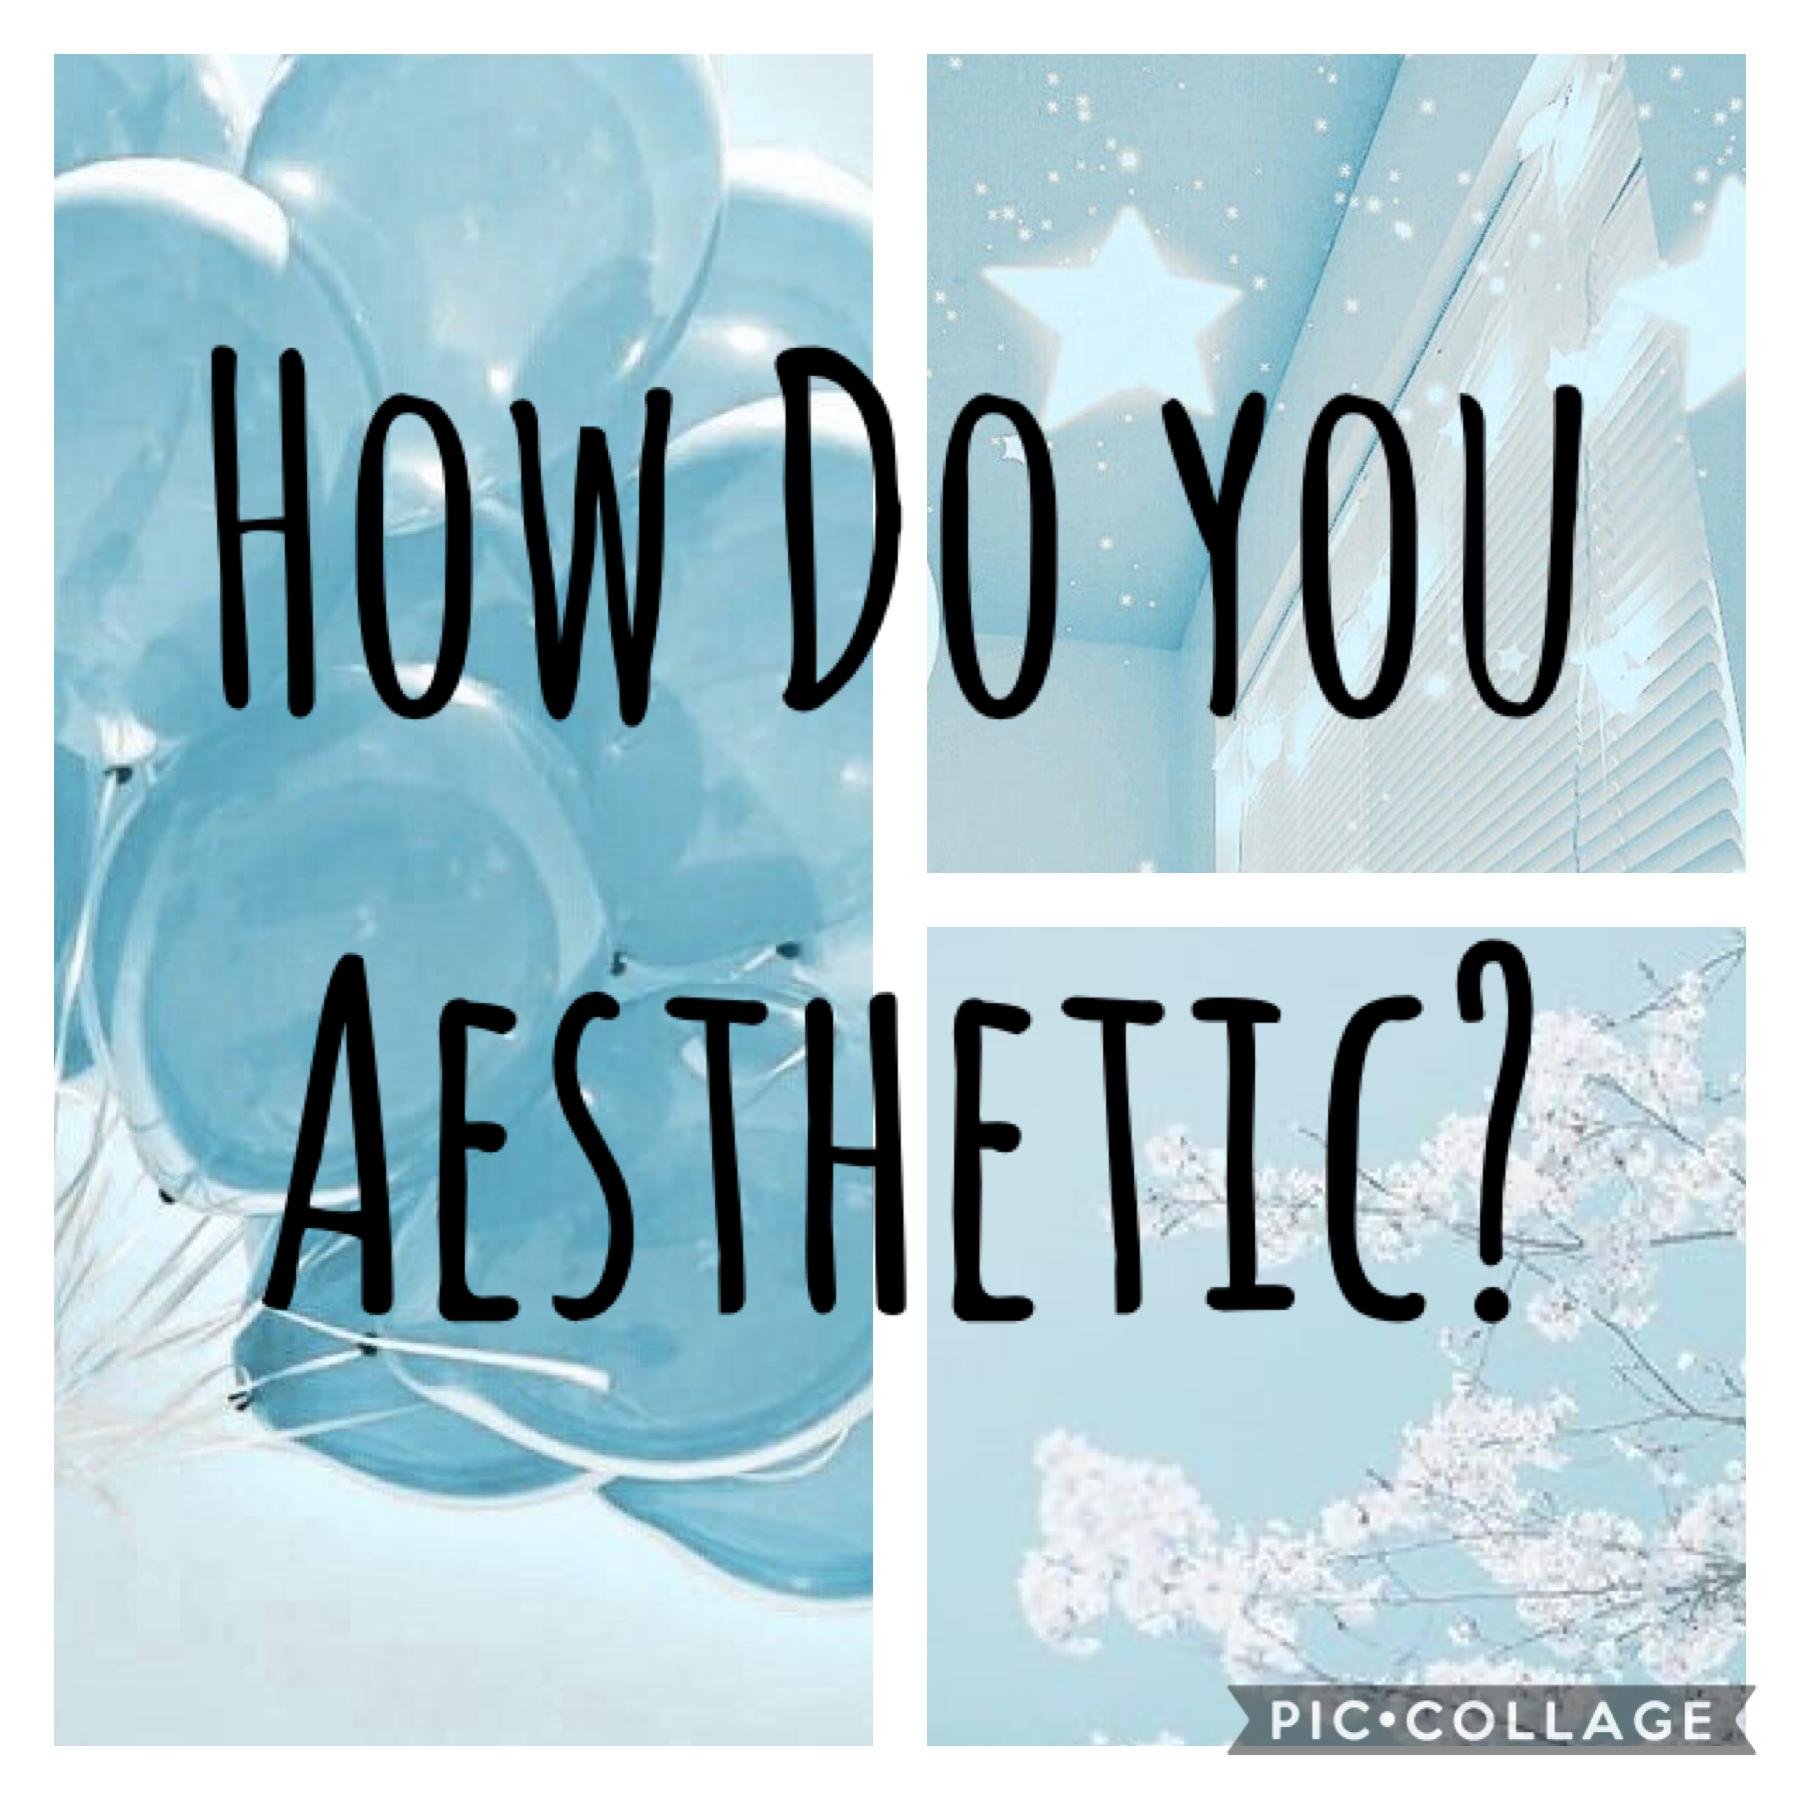 How Do you Aesthetic? Comment Below your favorite color that is aesthetic! #Aesthetic #Staysafe